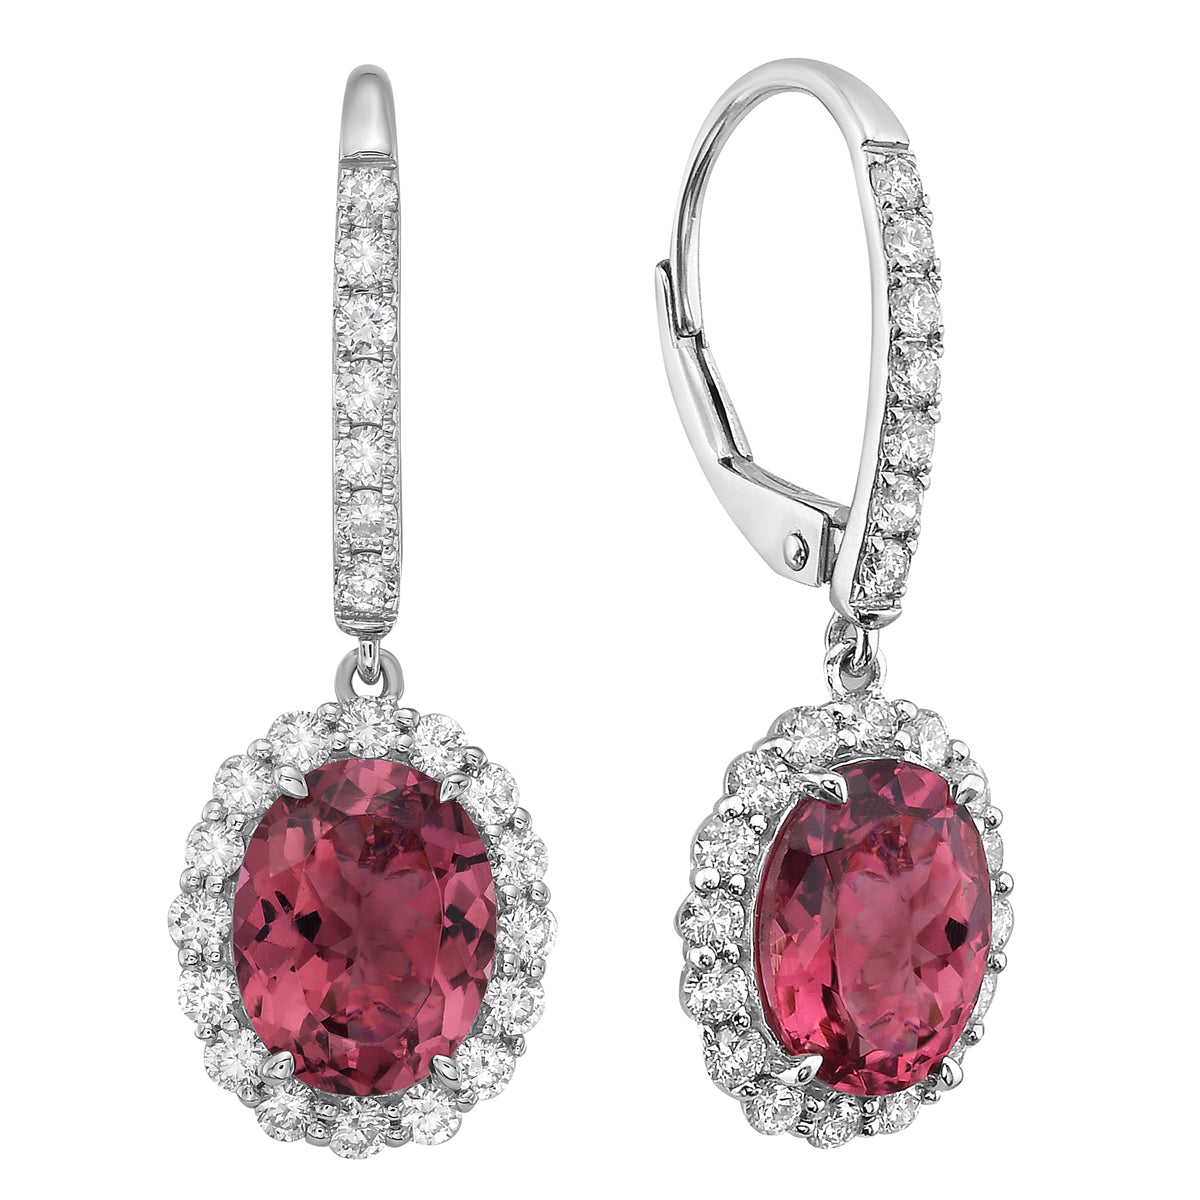 Earrings 14KW/2.8G 2PT-3.59CT 46RD-0.91CT Pink Tourmine